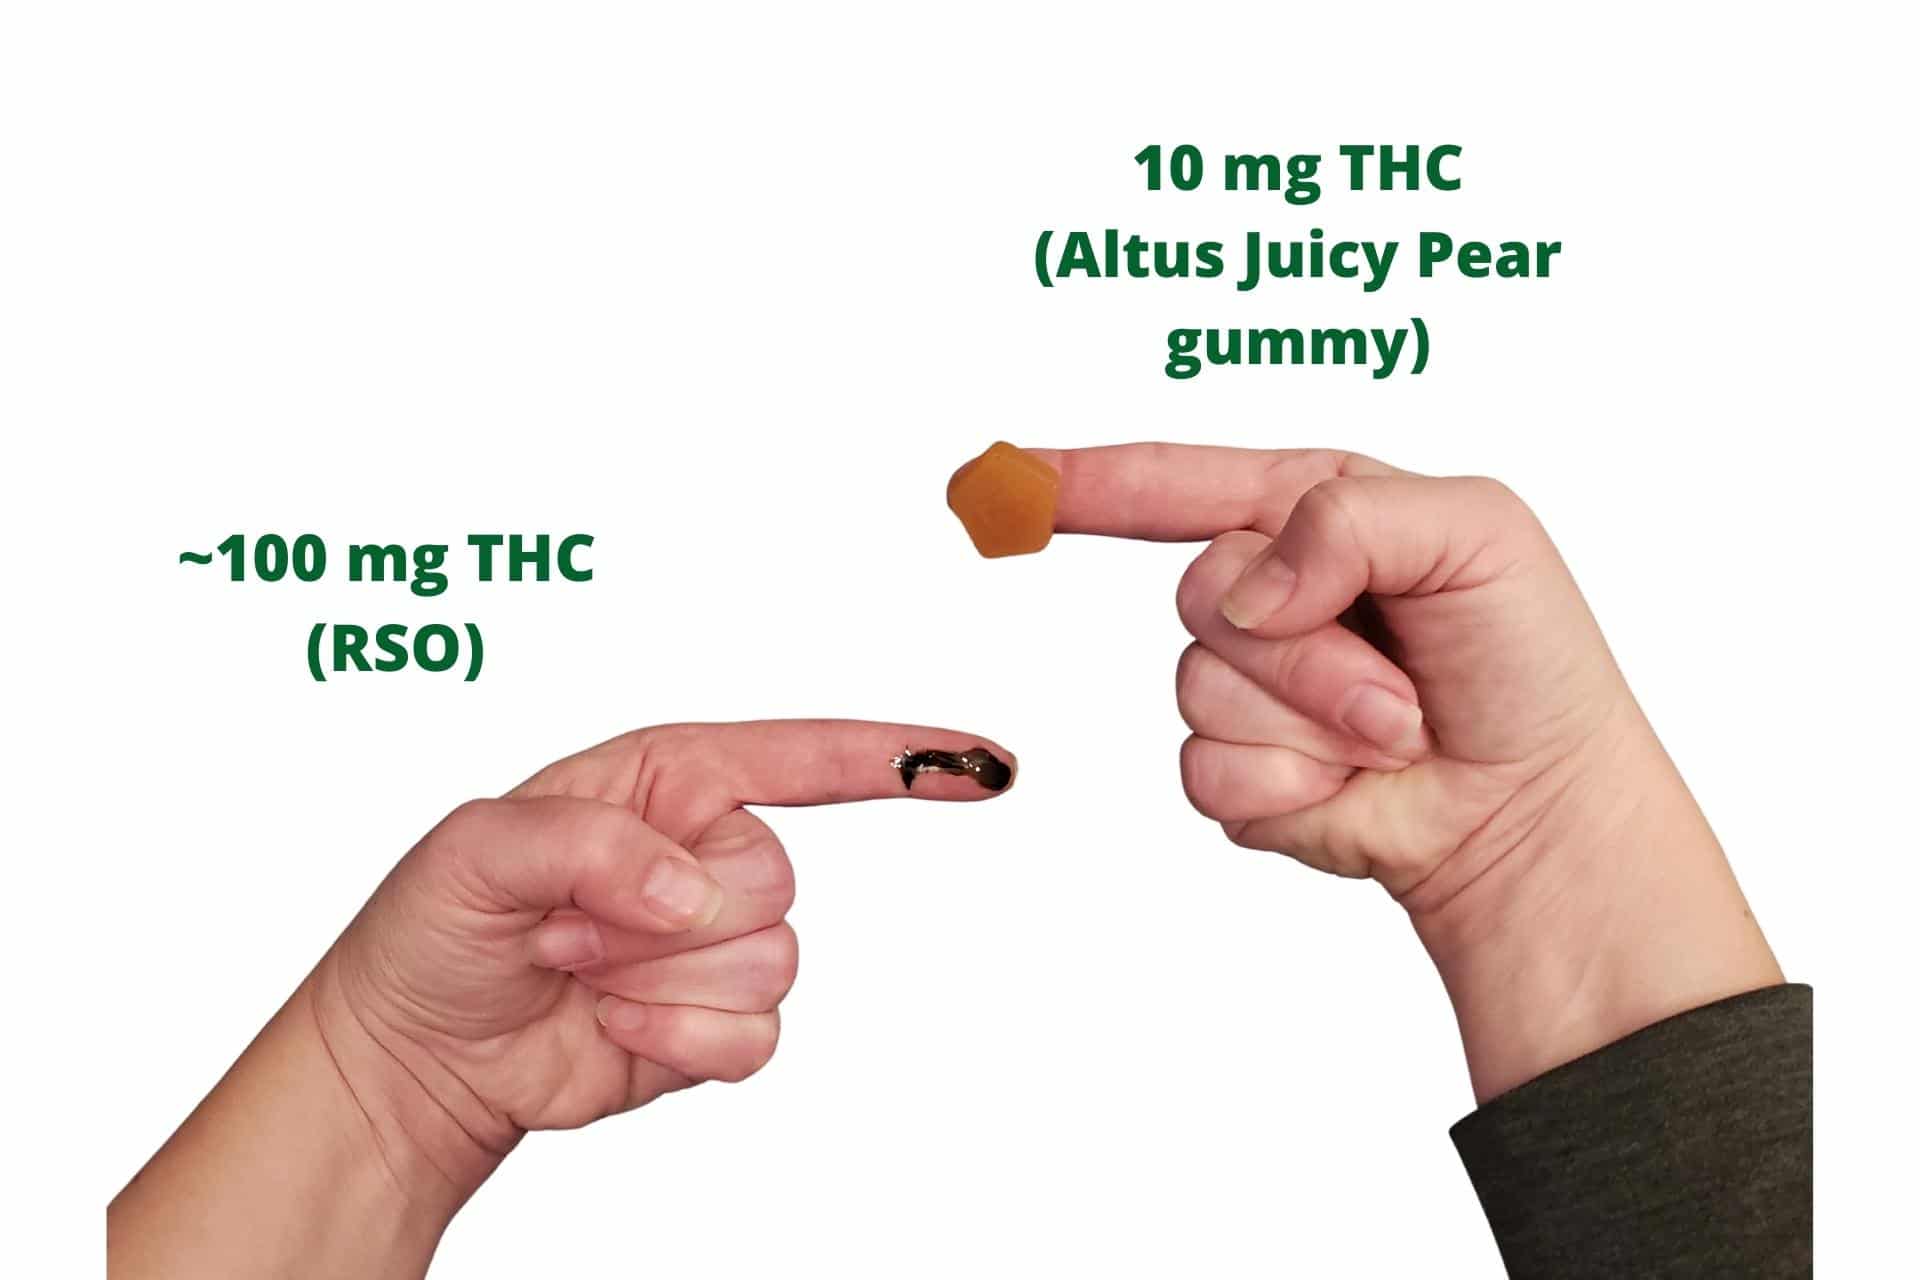 Two hands, showing a milliliter of RSO on the left fingertip, which contains 100mg THC, versus a 10 mg Altus brand Juicy Pear gummy on the right fingertip, showing how much stronger RSO is when compared to other cannabis products.